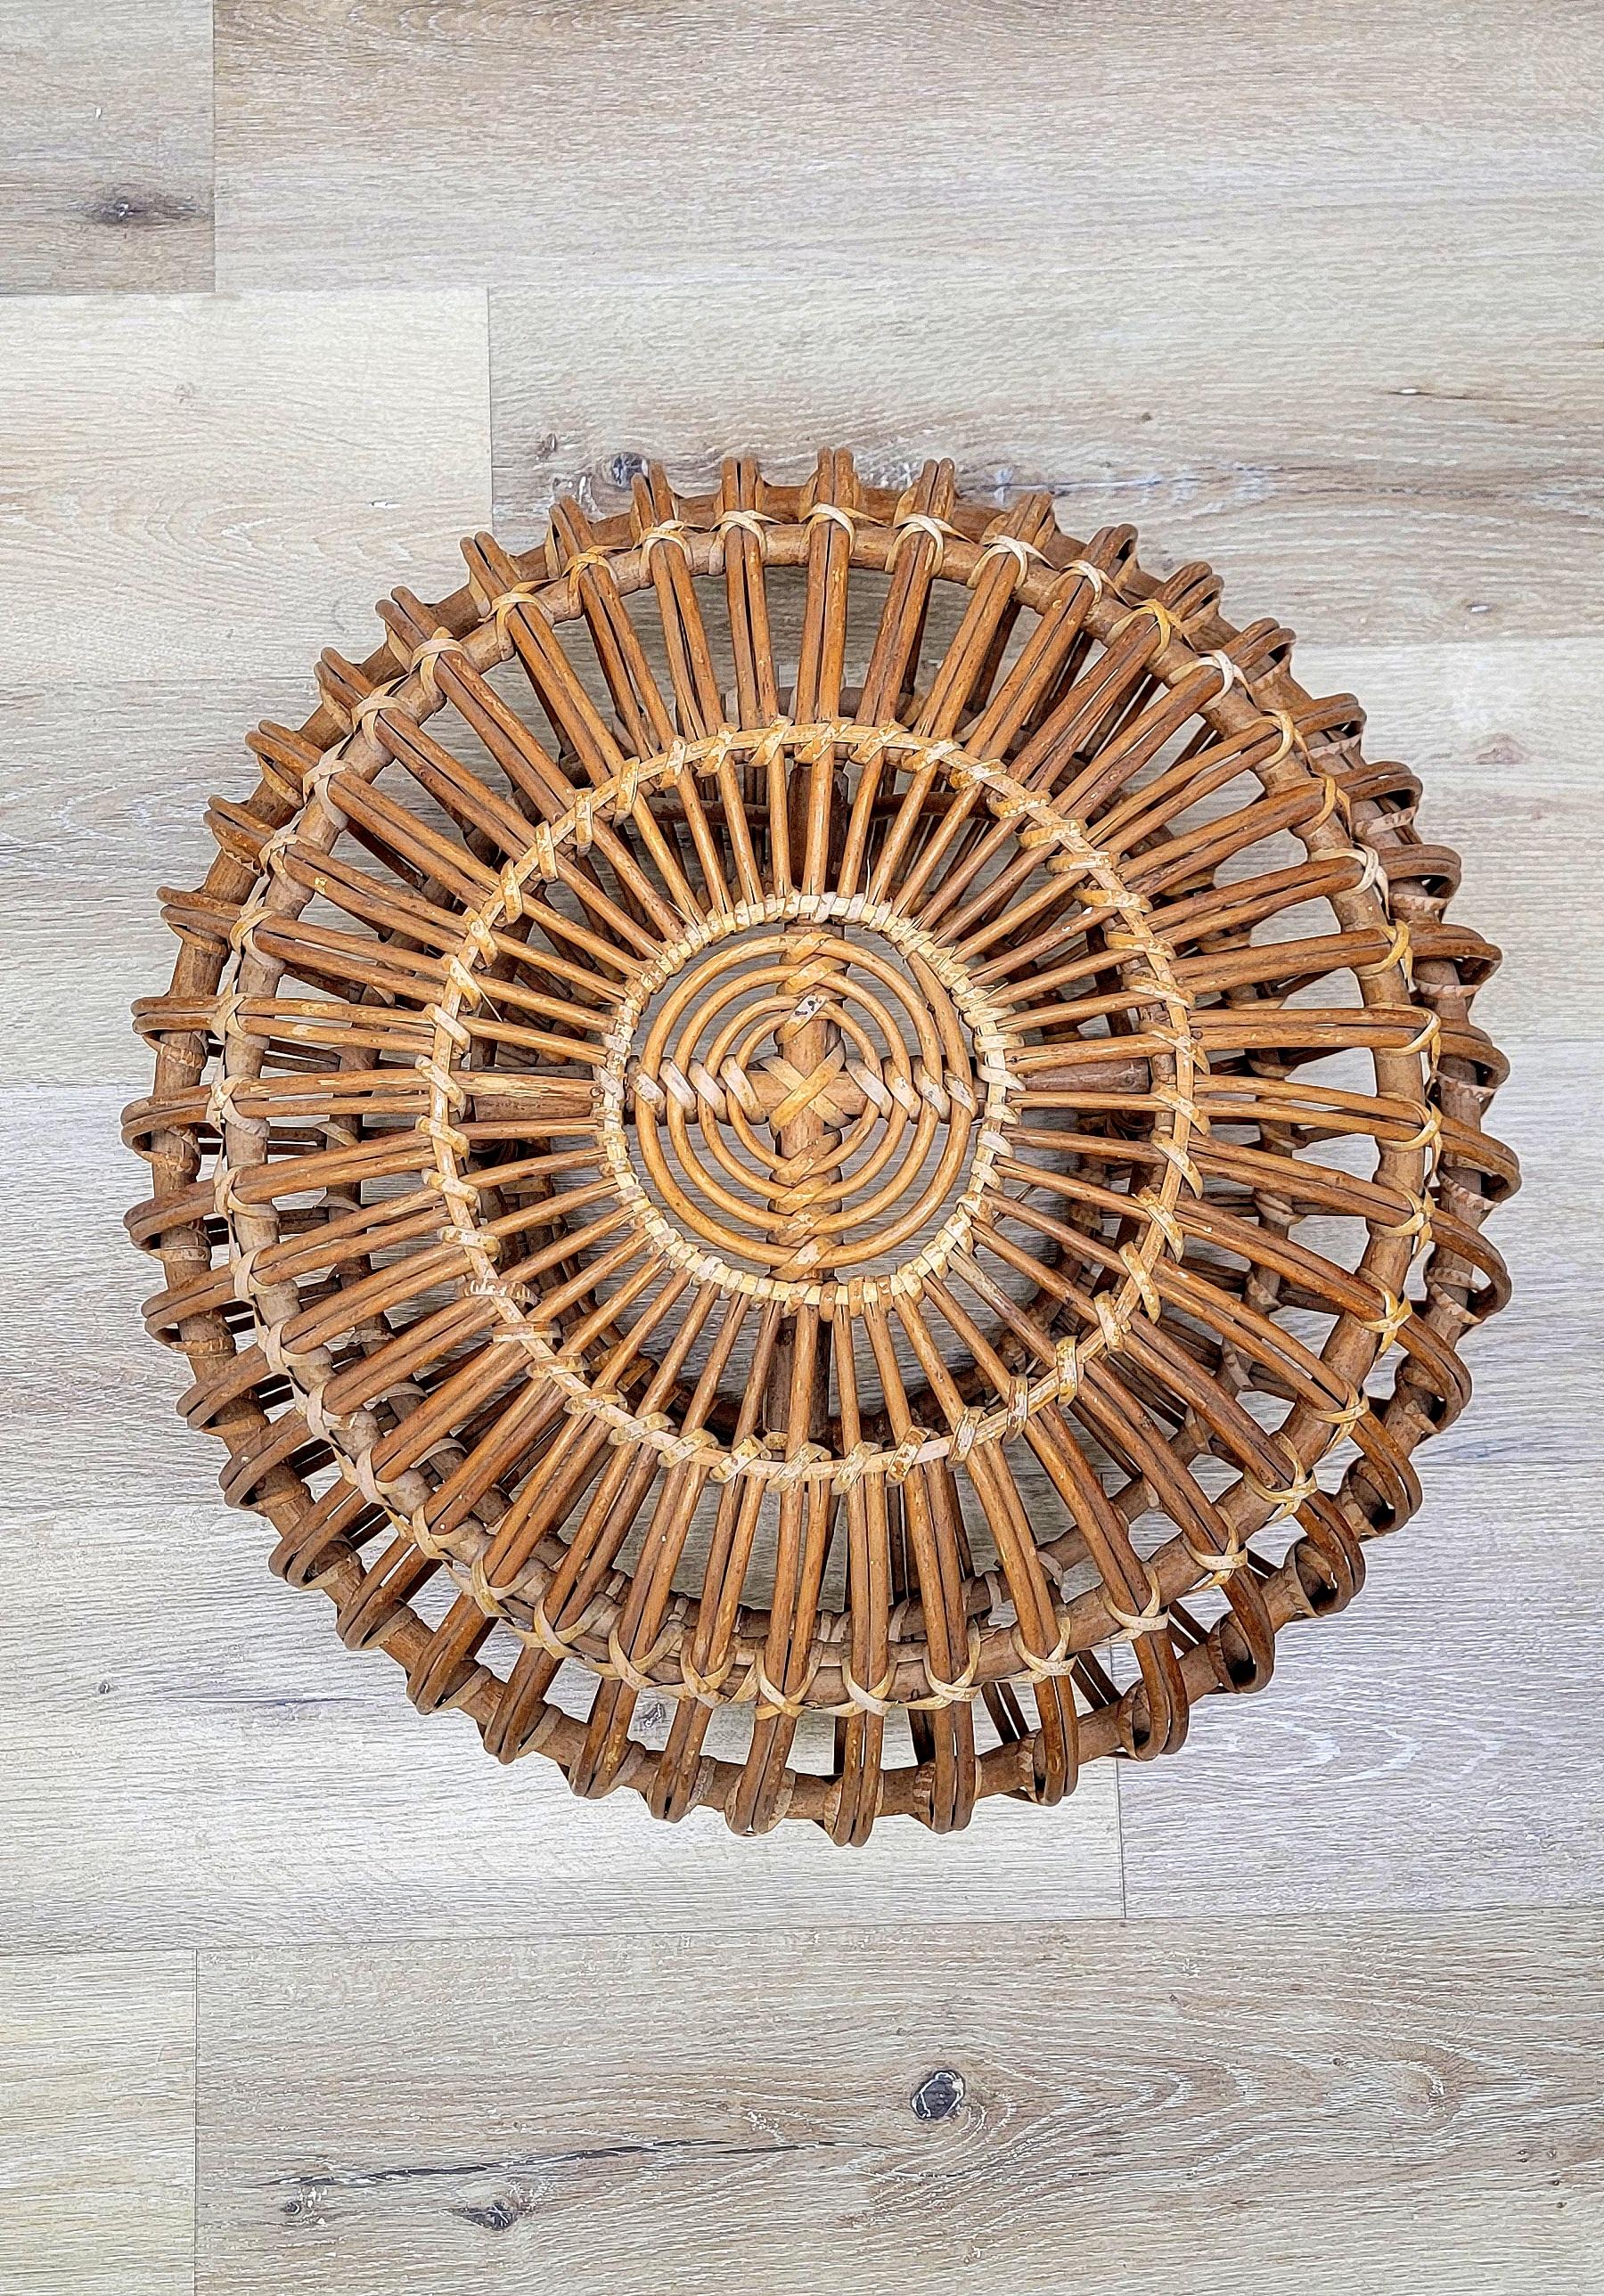 A vintage rattan round pouf designed by Franco Albini in the 1950s and manufactured by Vittorio Bonacina in the 1960s. An ingeniously designed stool that's composed solely of bent-rattan weaving makes for a Classic and stylish piece. Made of